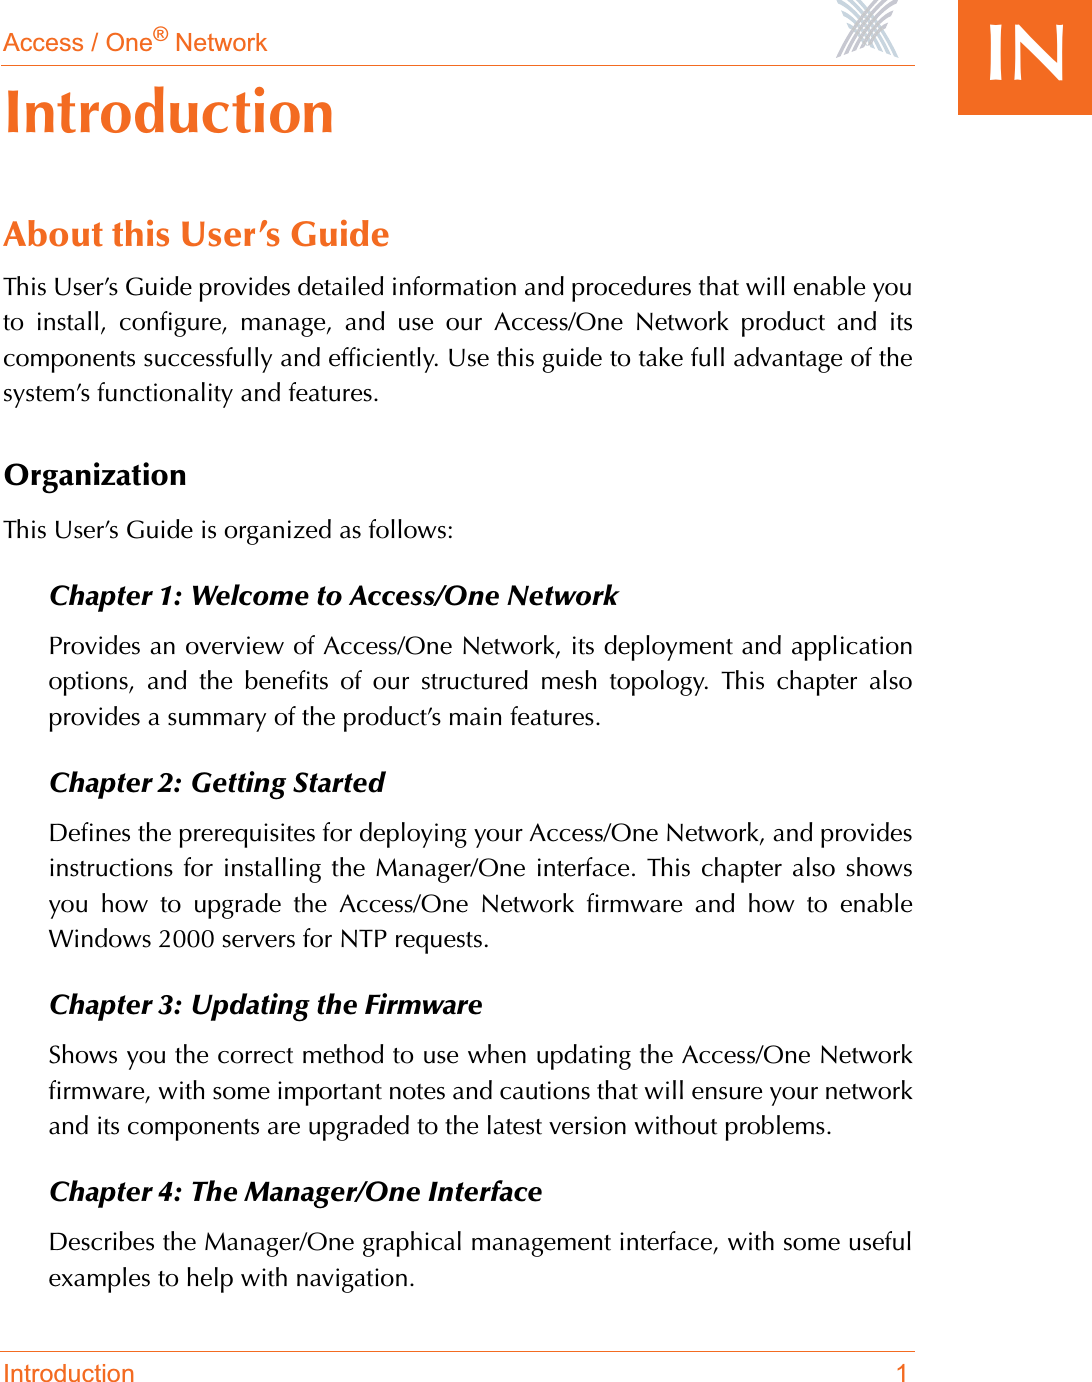 Access / One® NetworkIntroduction 1INIntroductionAbout this User’s GuideThis User’s Guide provides detailed information and procedures that will enable youto install, configure, manage, and use our Access/One Network product and itscomponents successfully and efficiently. Use this guide to take full advantage of thesystem’s functionality and features.OrganizationThis User’s Guide is organized as follows:Chapter 1: Welcome to Access/One NetworkProvides an overview of Access/One Network, its deployment and applicationoptions, and the benefits of our structured mesh topology. This chapter alsoprovides a summary of the product’s main features.Chapter 2: Getting StartedDefines the prerequisites for deploying your Access/One Network, and providesinstructions for installing the Manager/One interface. This chapter also showsyou how to upgrade the Access/One Network firmware and how to enableWindows 2000 servers for NTP requests.Chapter 3: Updating the FirmwareShows you the correct method to use when updating the Access/One Networkfirmware, with some important notes and cautions that will ensure your networkand its components are upgraded to the latest version without problems.Chapter 4: The Manager/One InterfaceDescribes the Manager/One graphical management interface, with some usefulexamples to help with navigation.